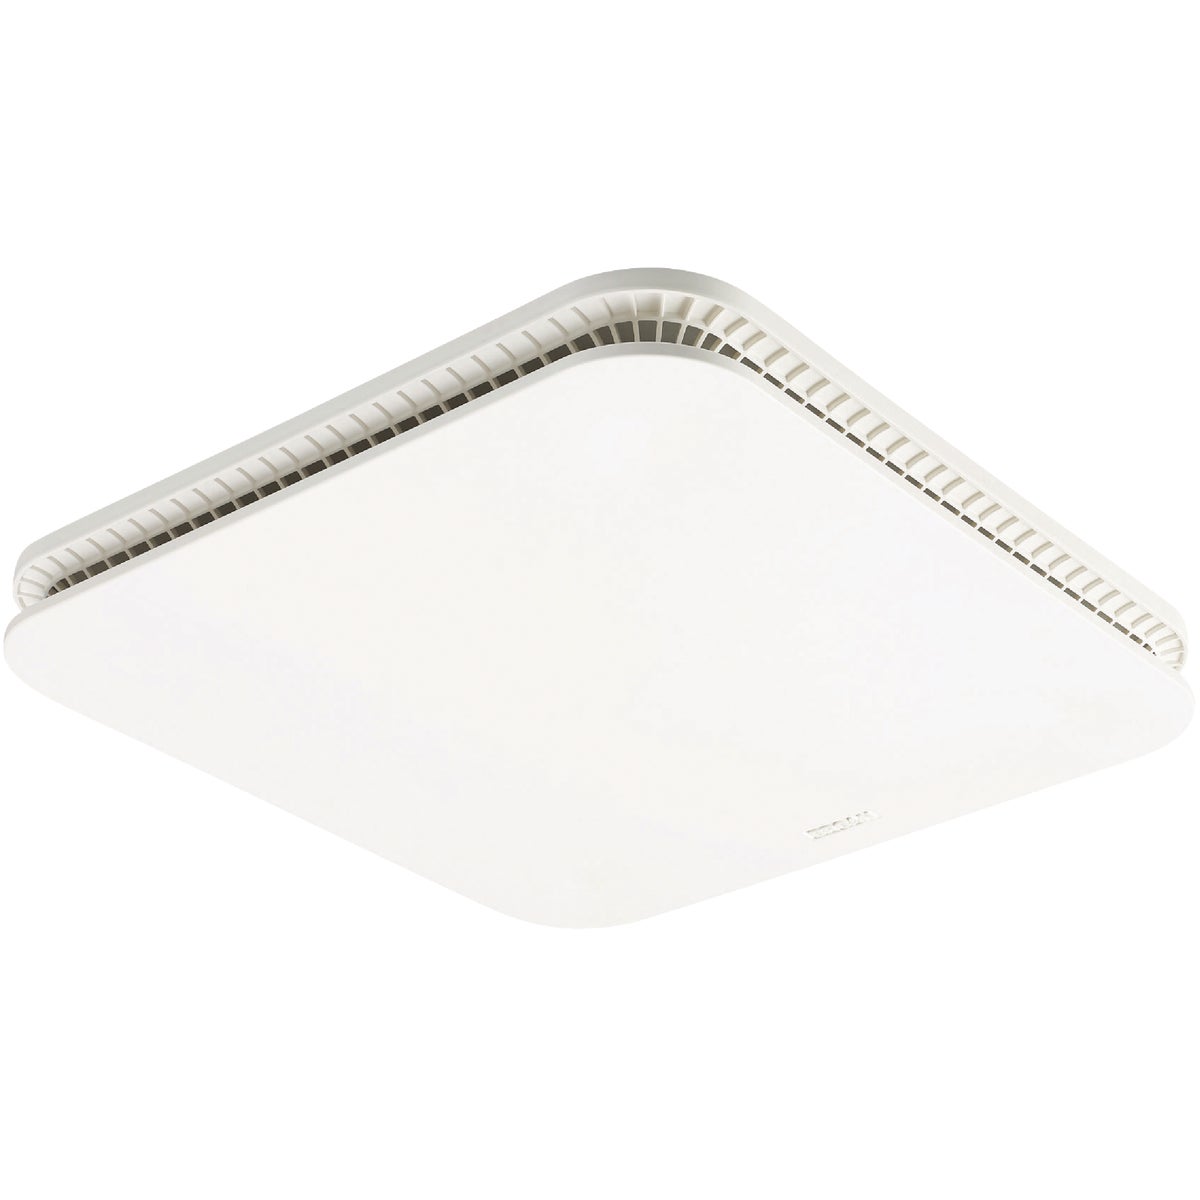 Broan CleanCover 13-1/4 In. x 13-1/4 In. x 1-5/16 In. White Universal Bath Exhaust Fan Upgrade Grille